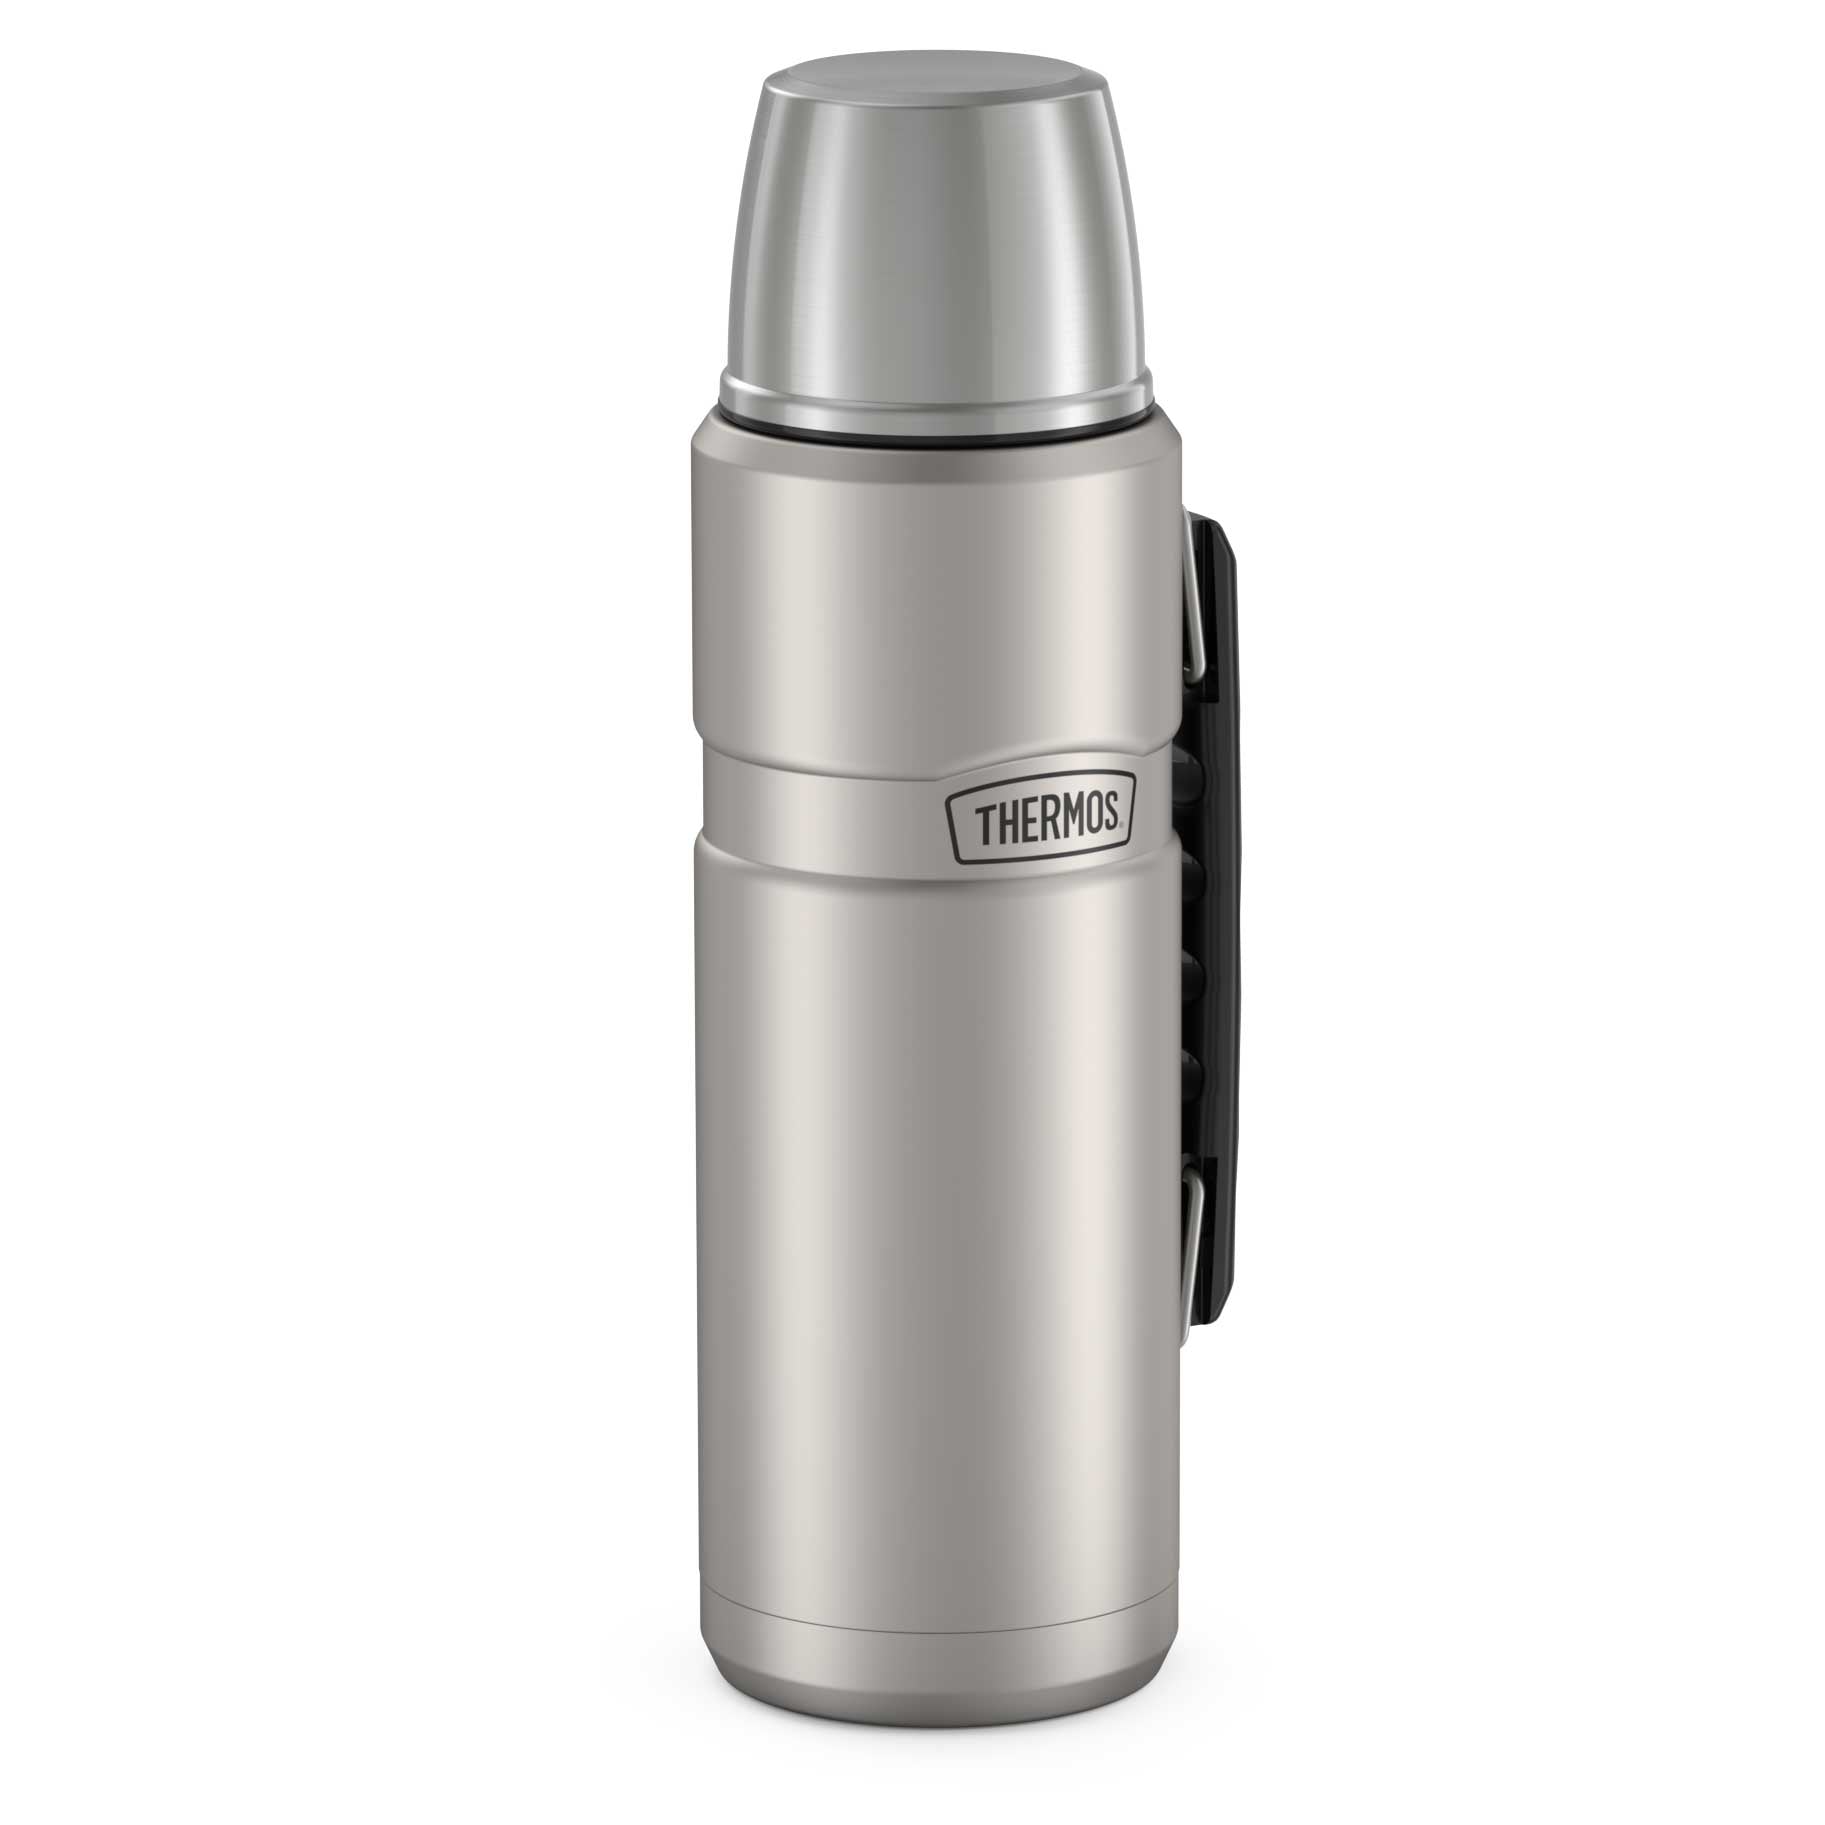 Thermos 40oz Stainless Steel Wide Mouth Hydration Bottle Saddle